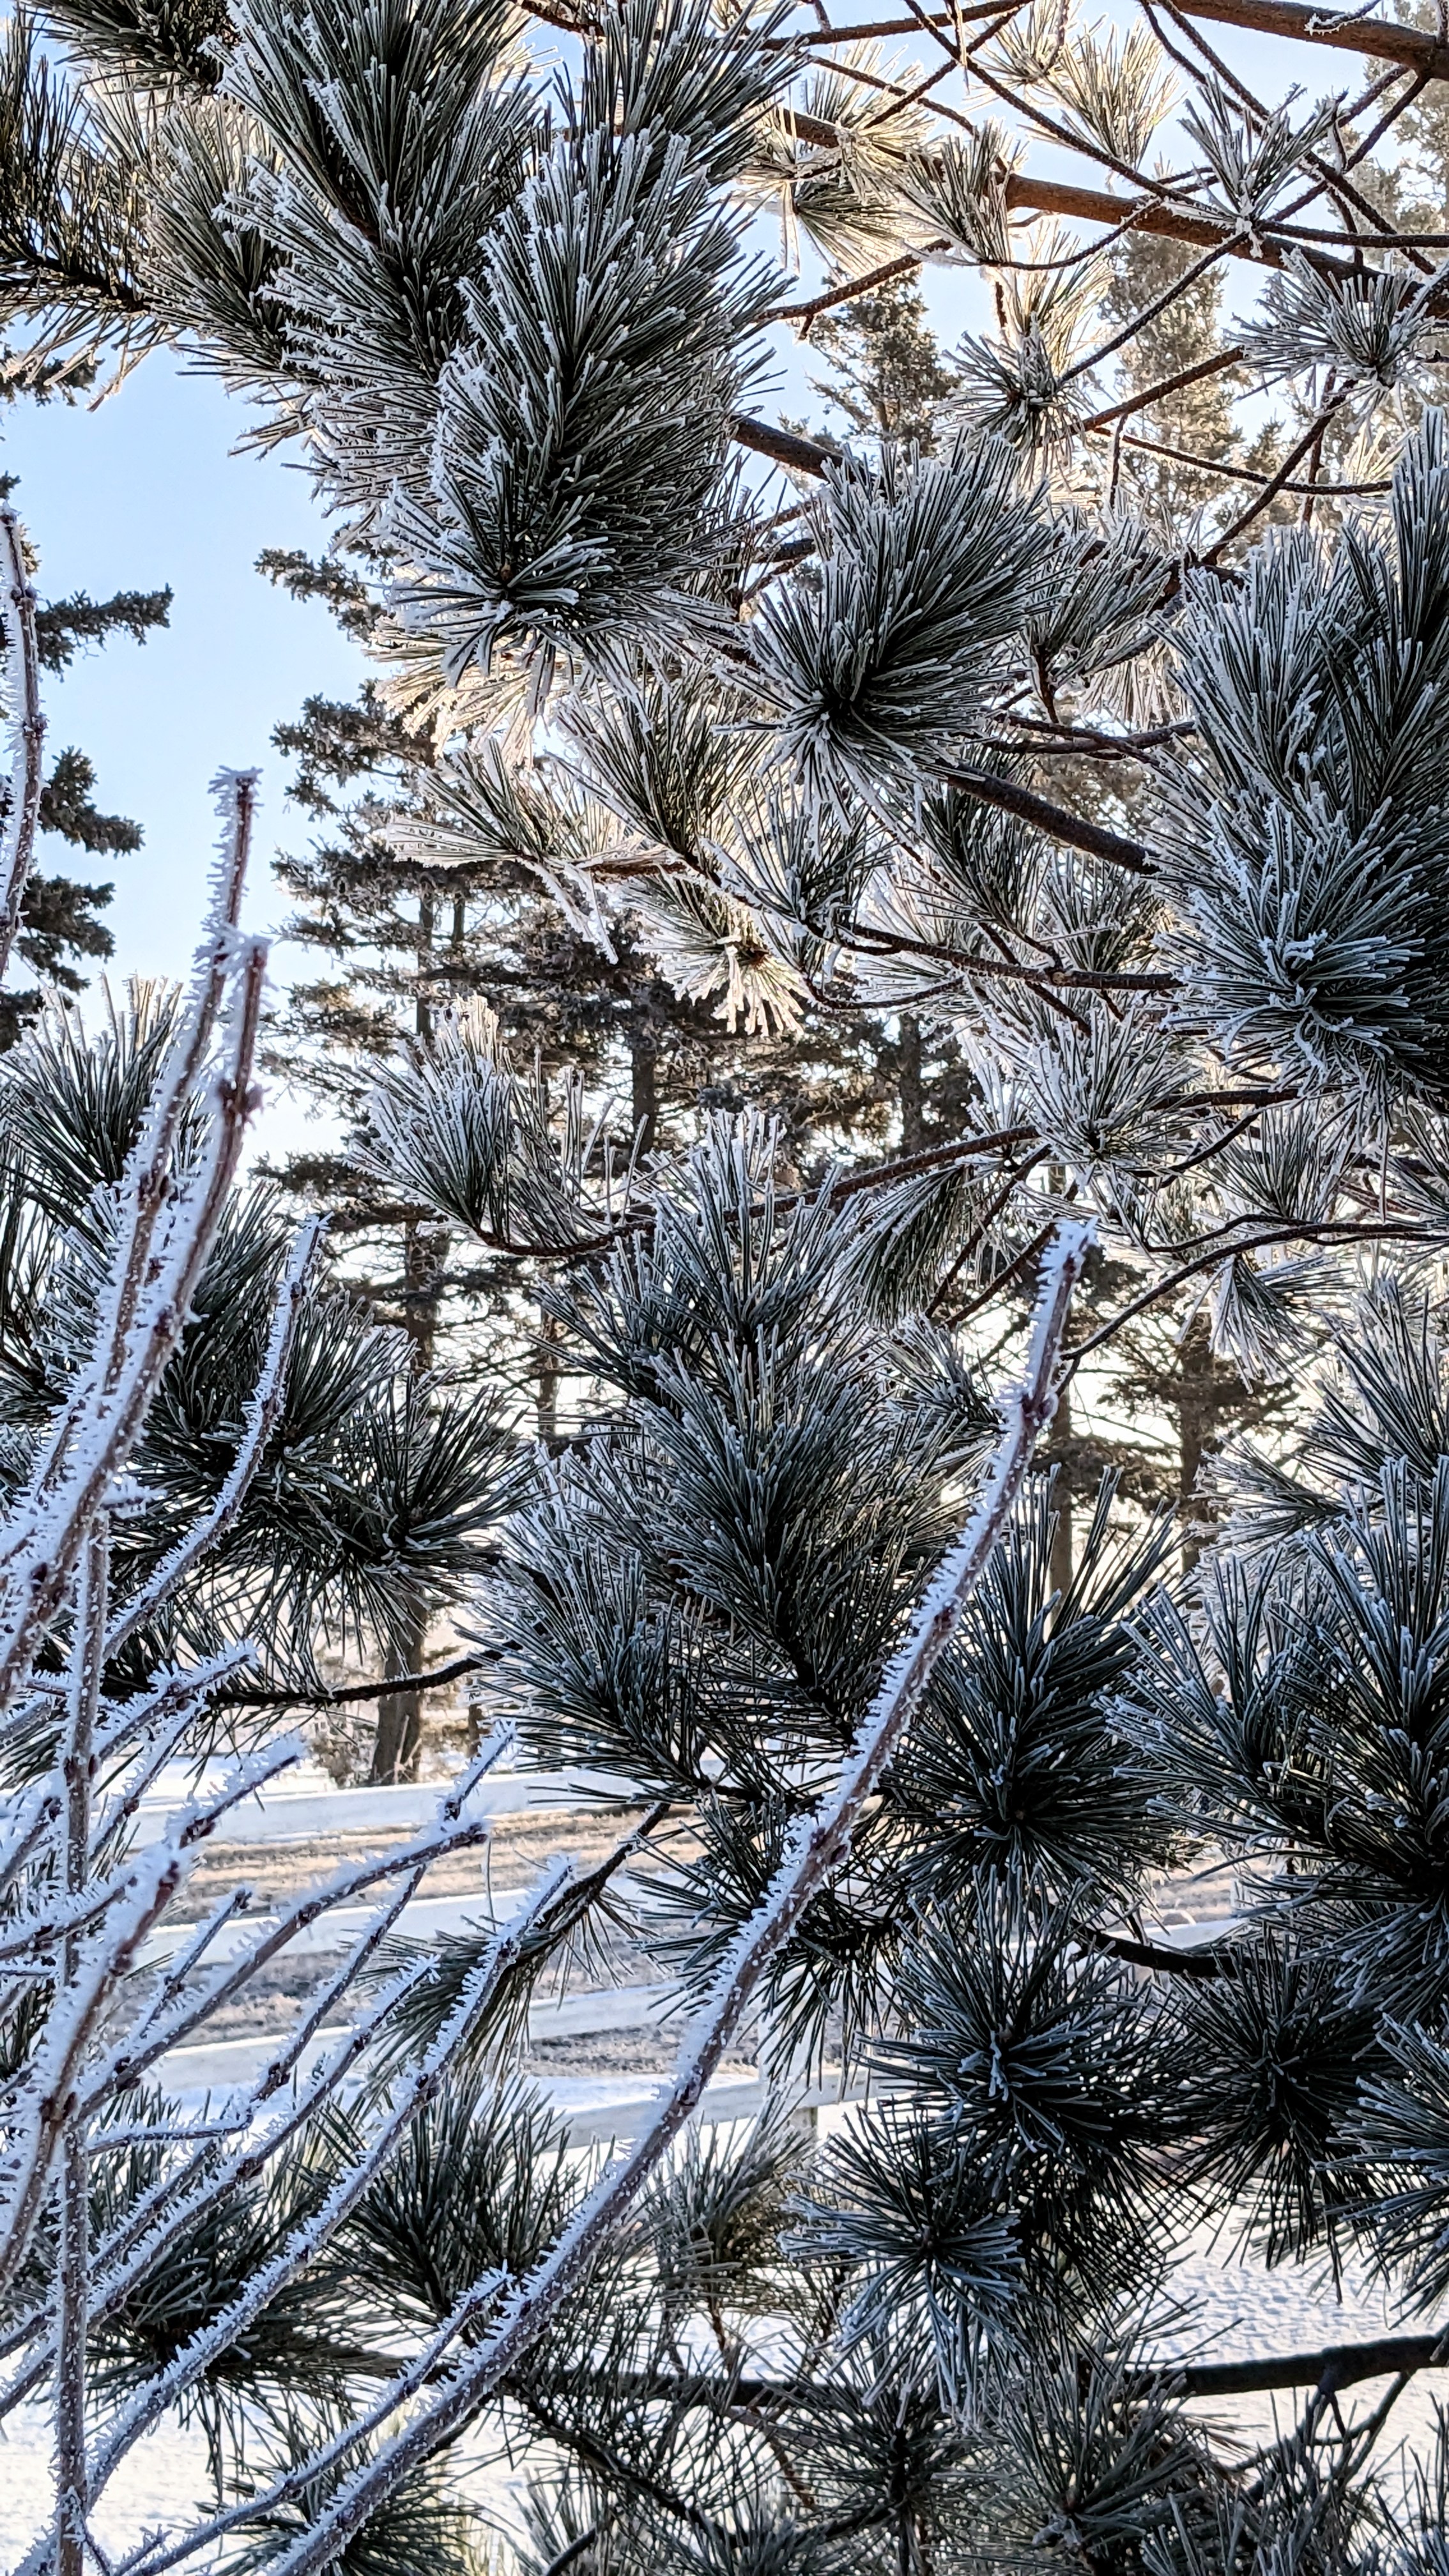 Frosty pine branches sparkling in the sunlight